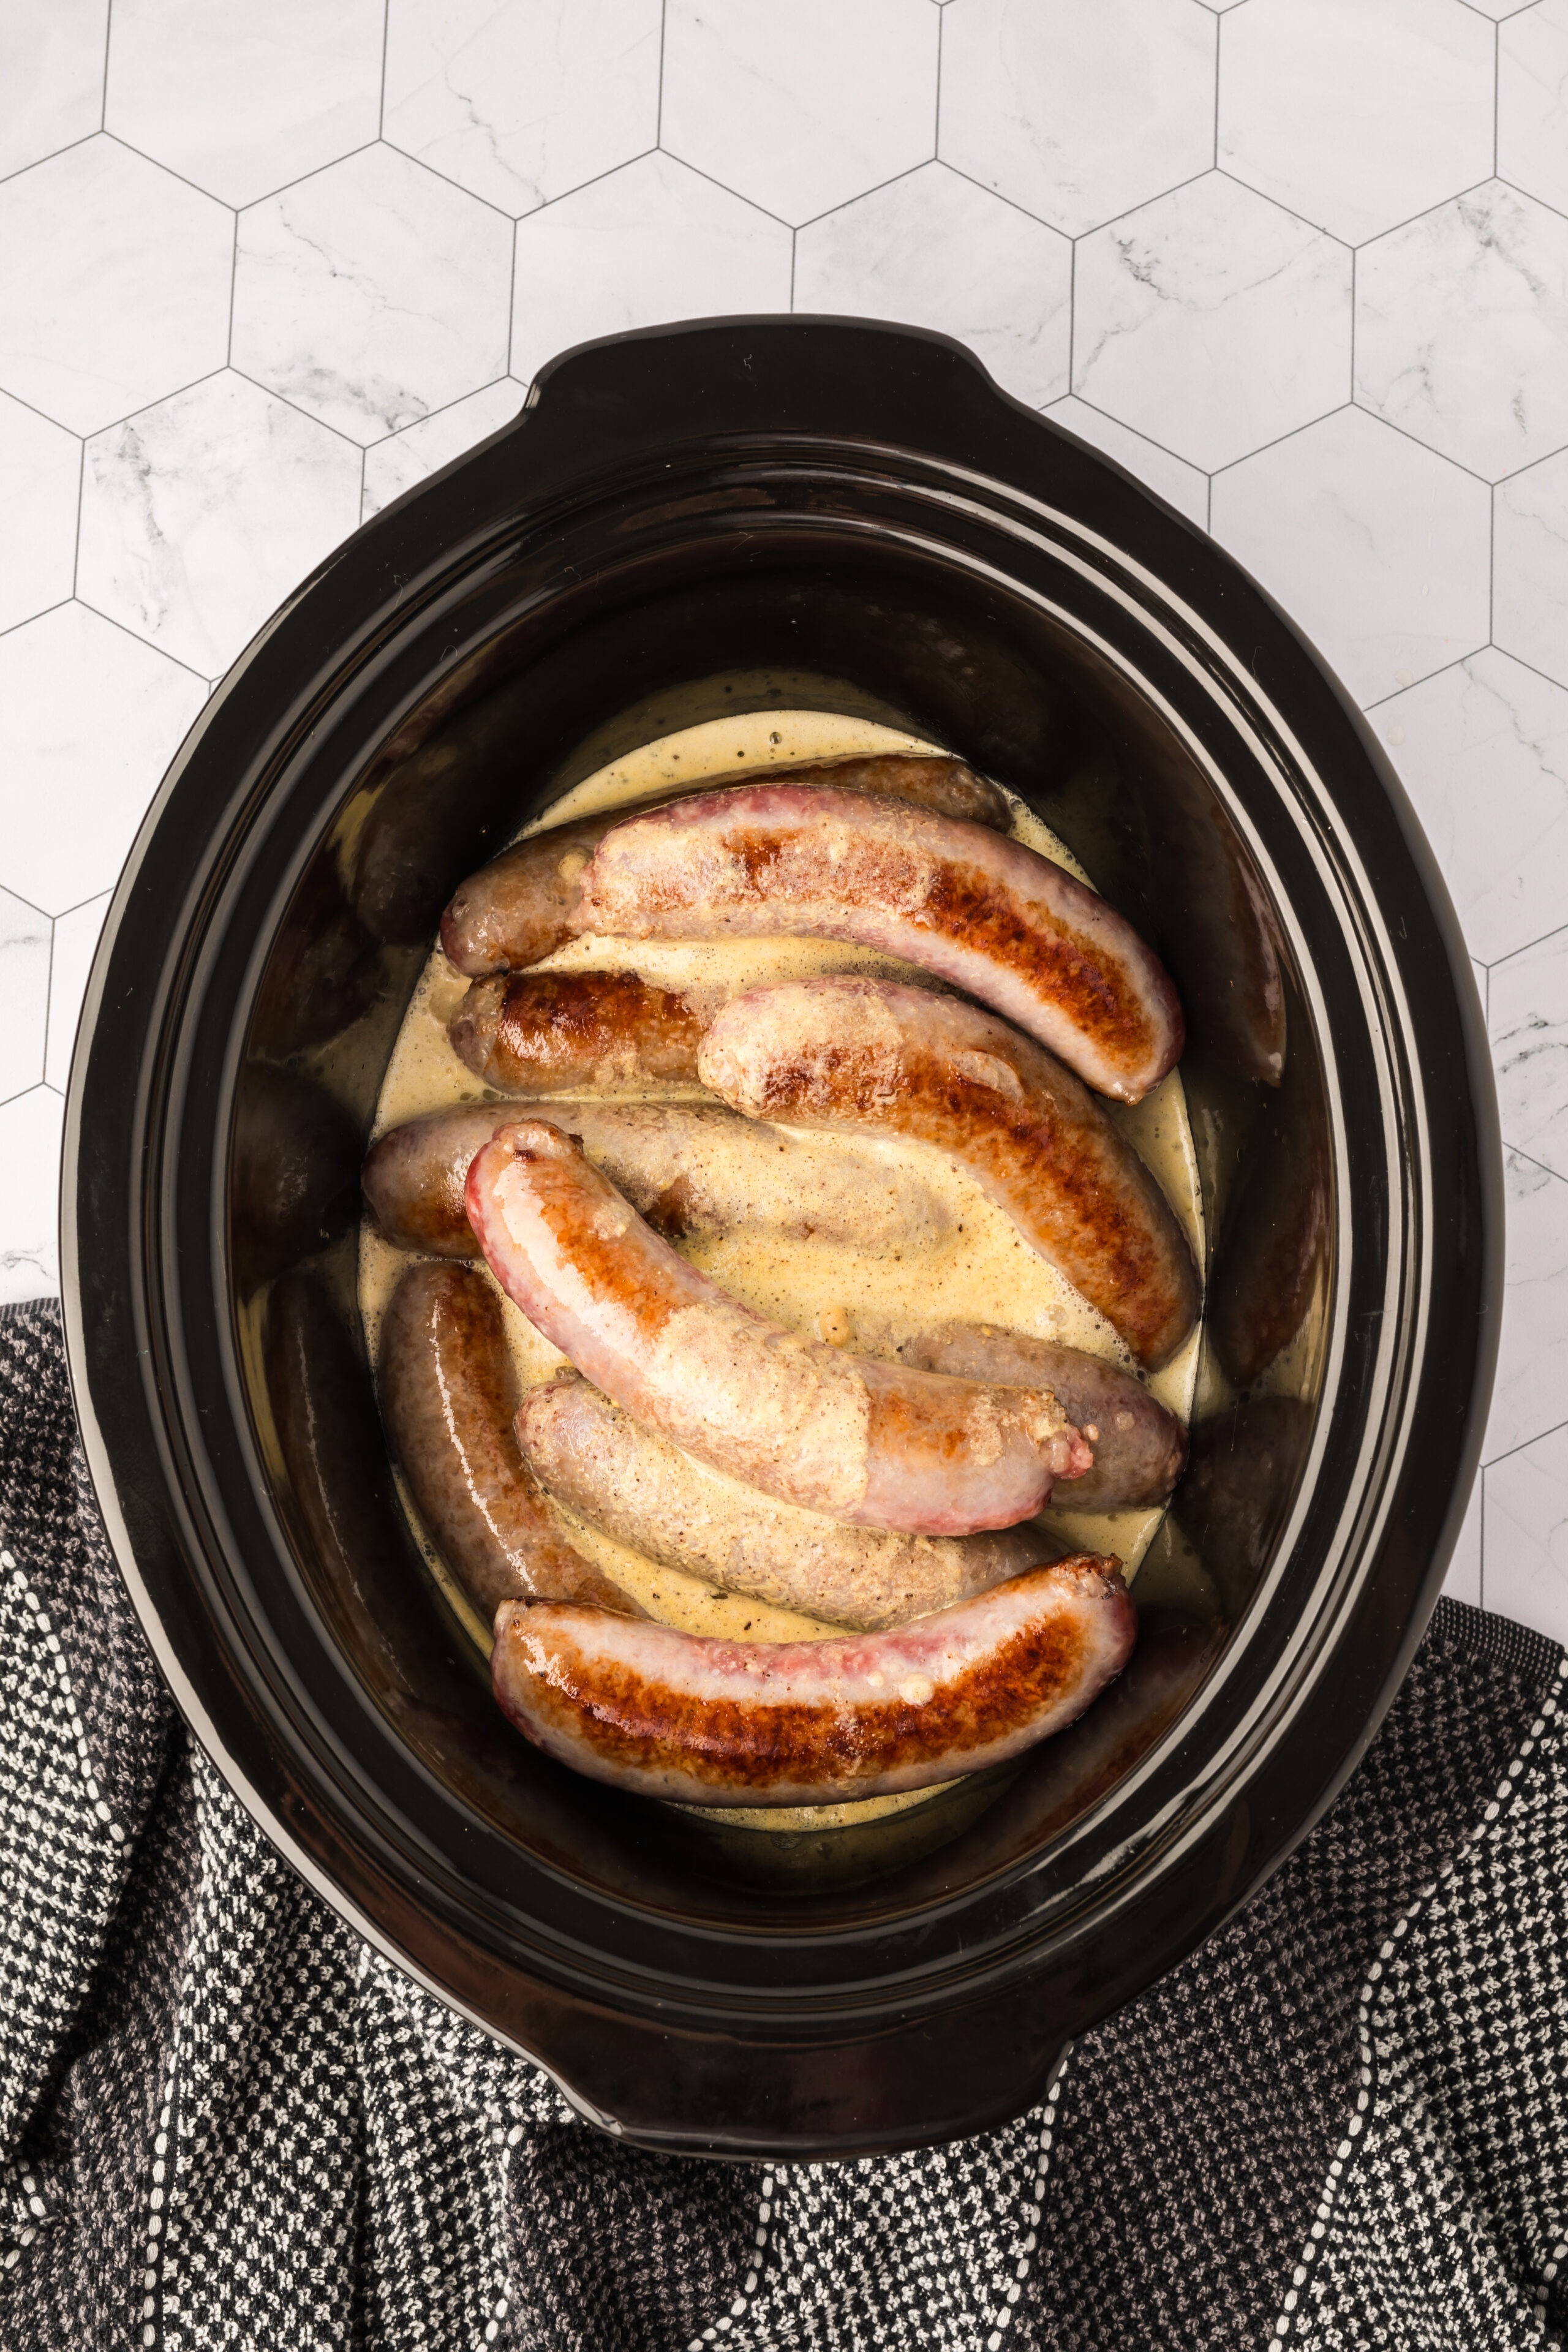 Cooking the brats in the slow cooker